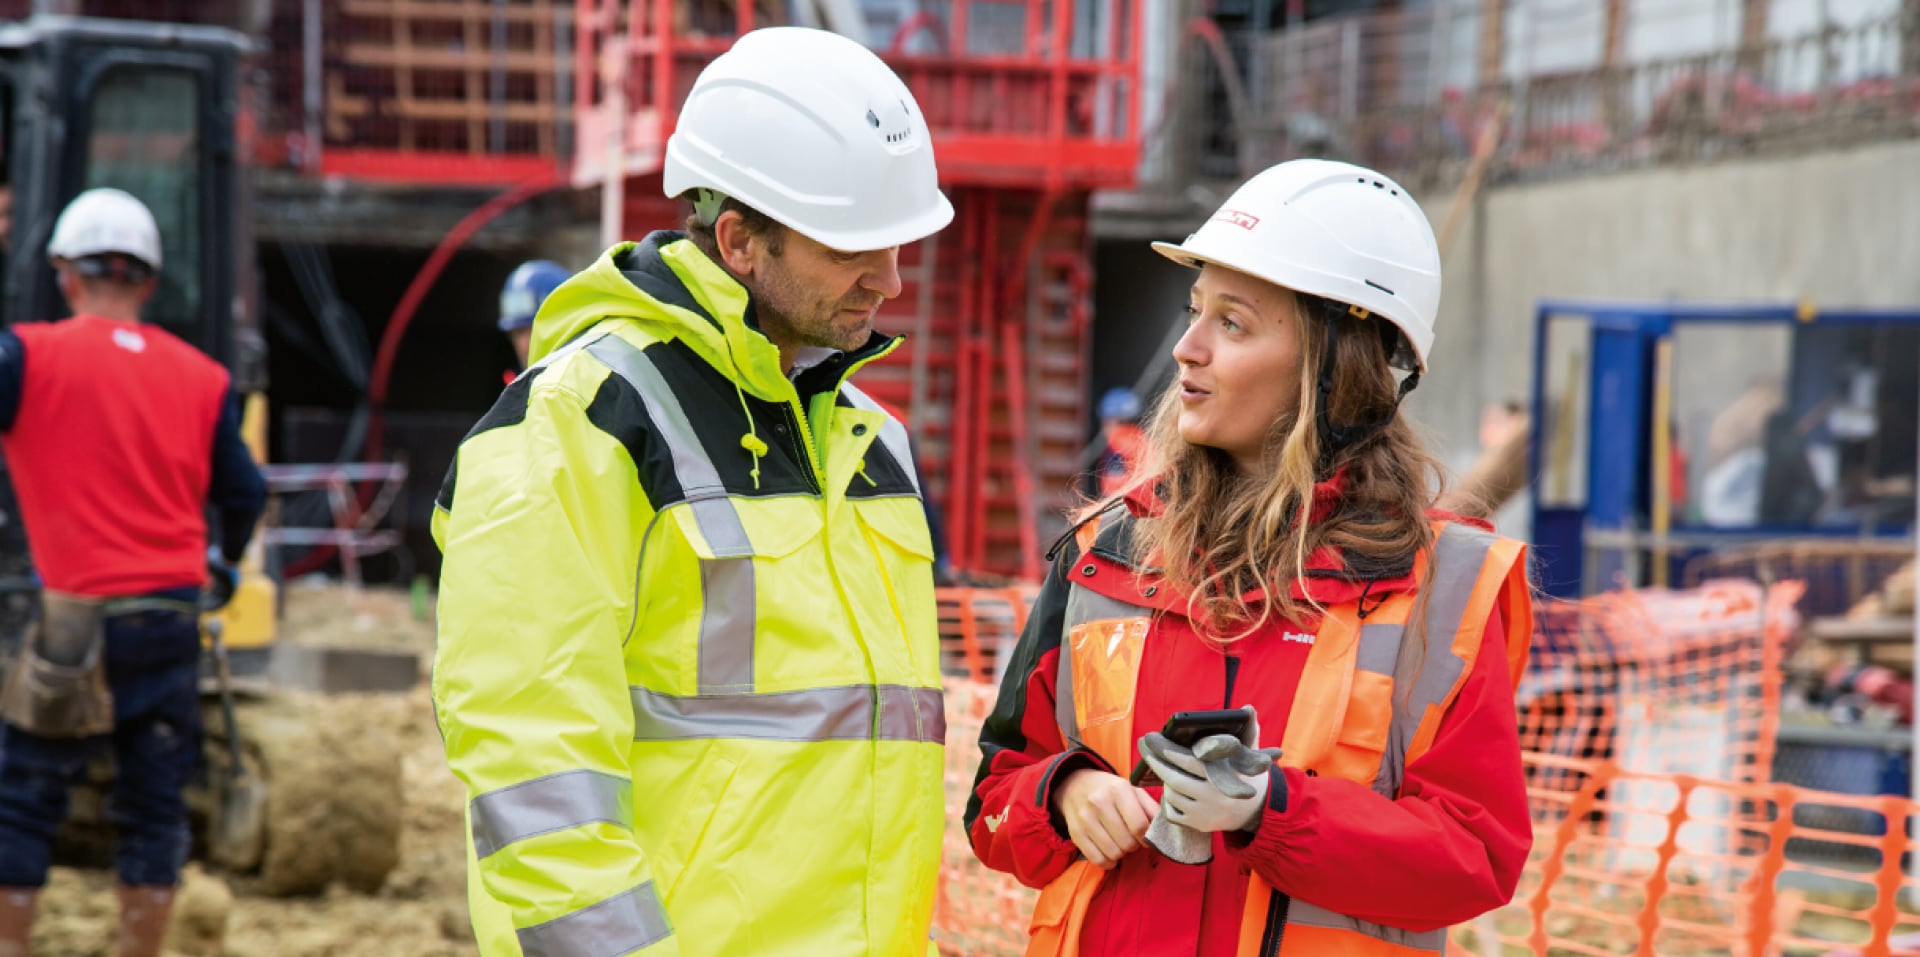 Receive first-class customer support on the jobsite through onsite consultations, an individualized solution, full implementation, onsite training and change management support.